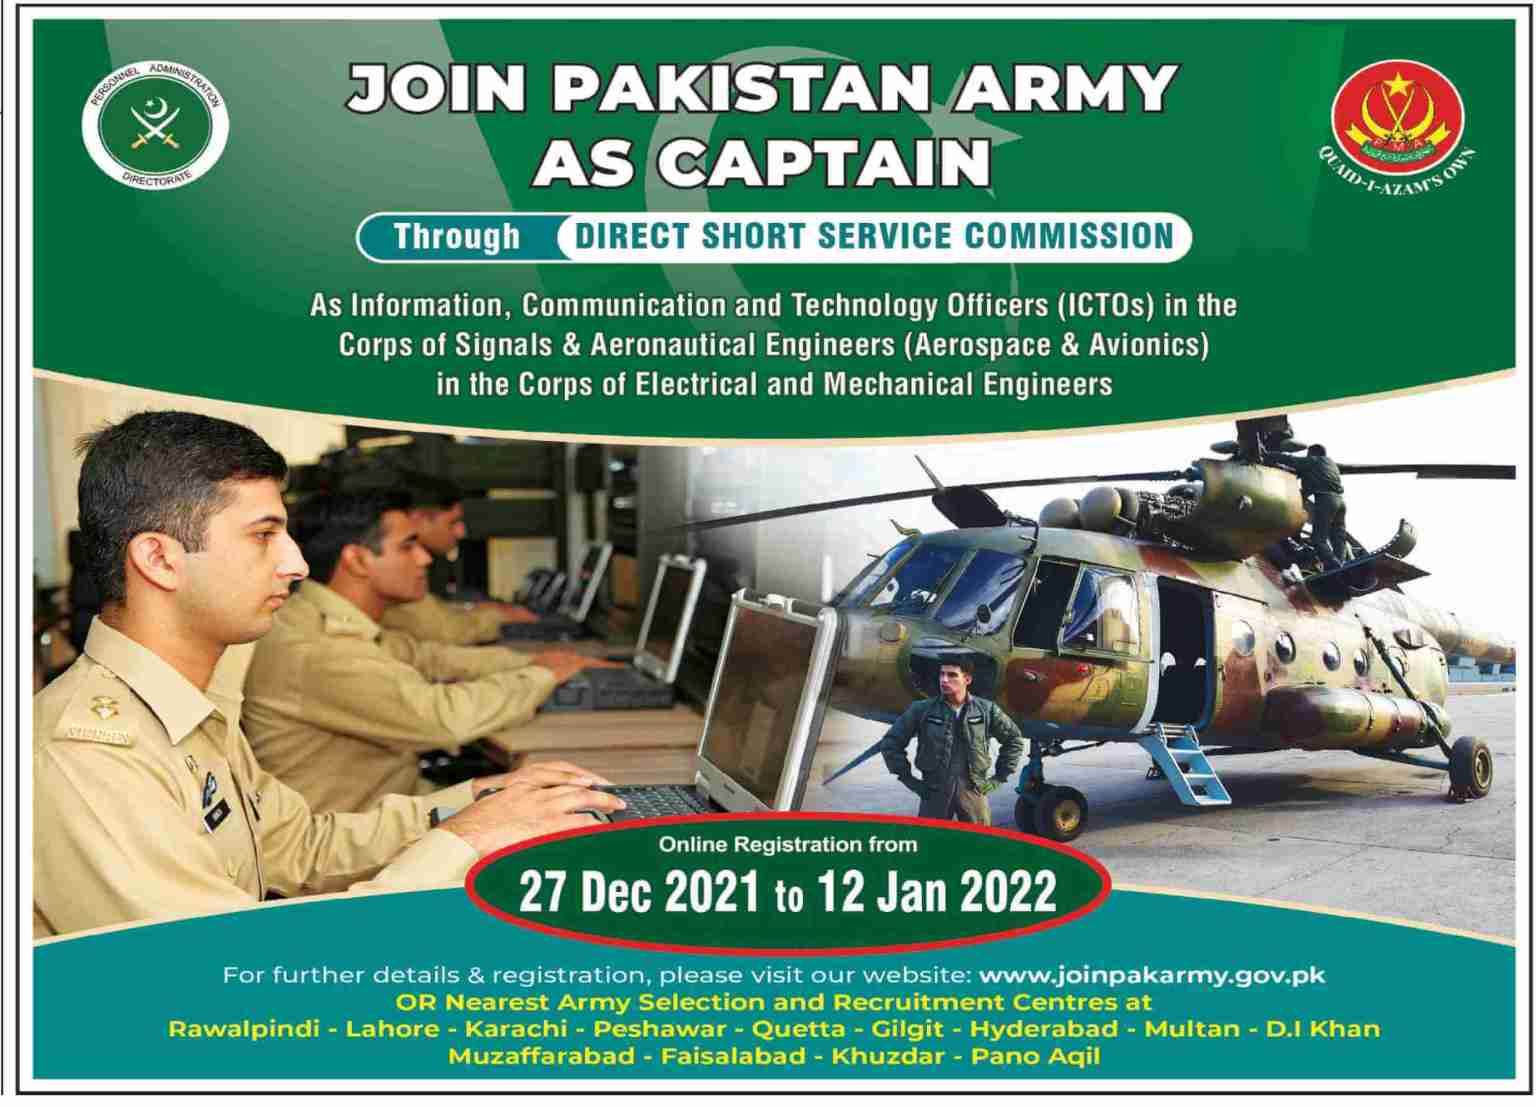 Join Pak Army as ICTO Captain through Direct Short Service Commission Jobs 2021 | Latest Job in Pakistan